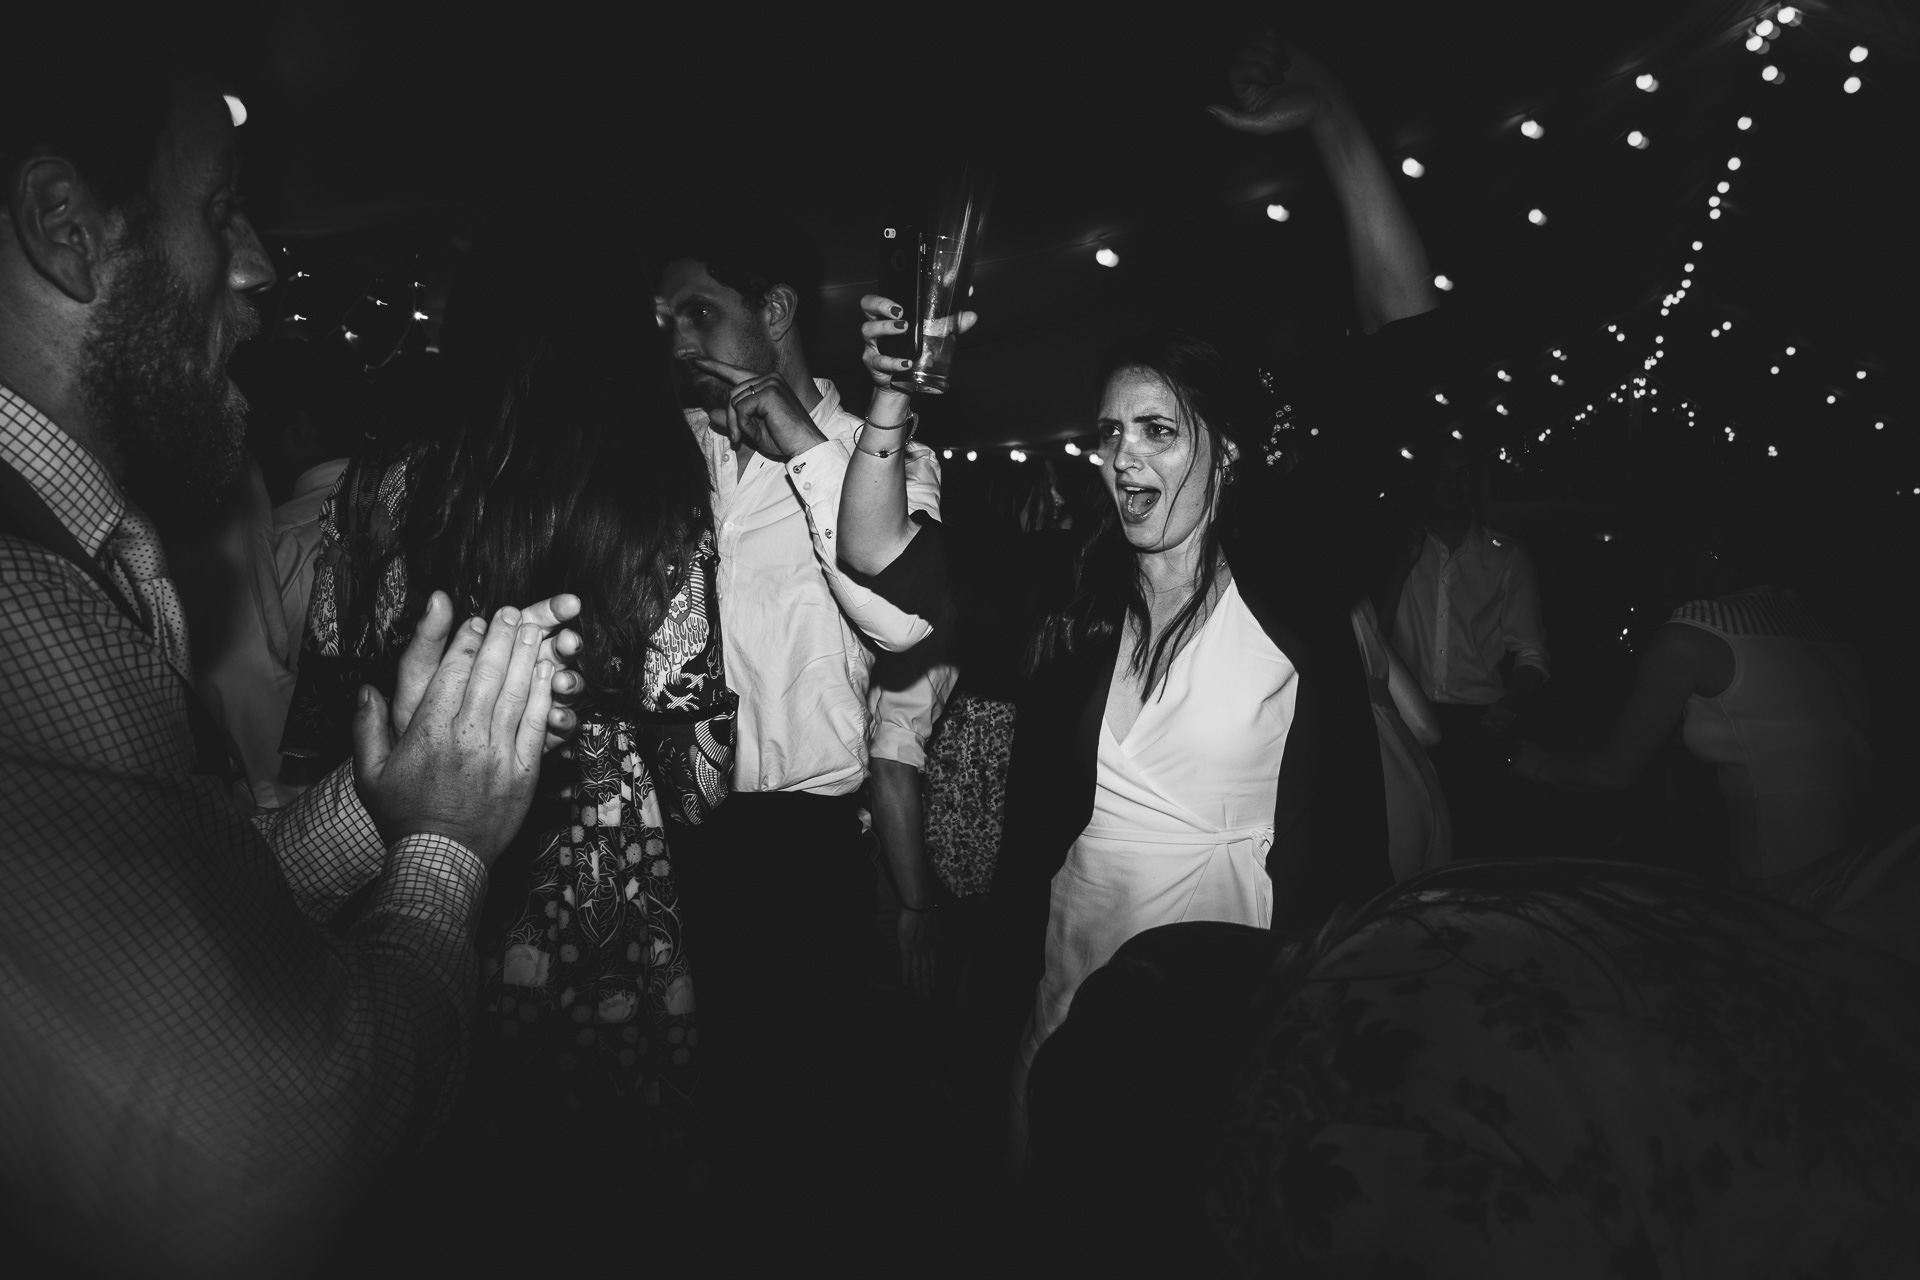 Wedding guests partying on the dance floor